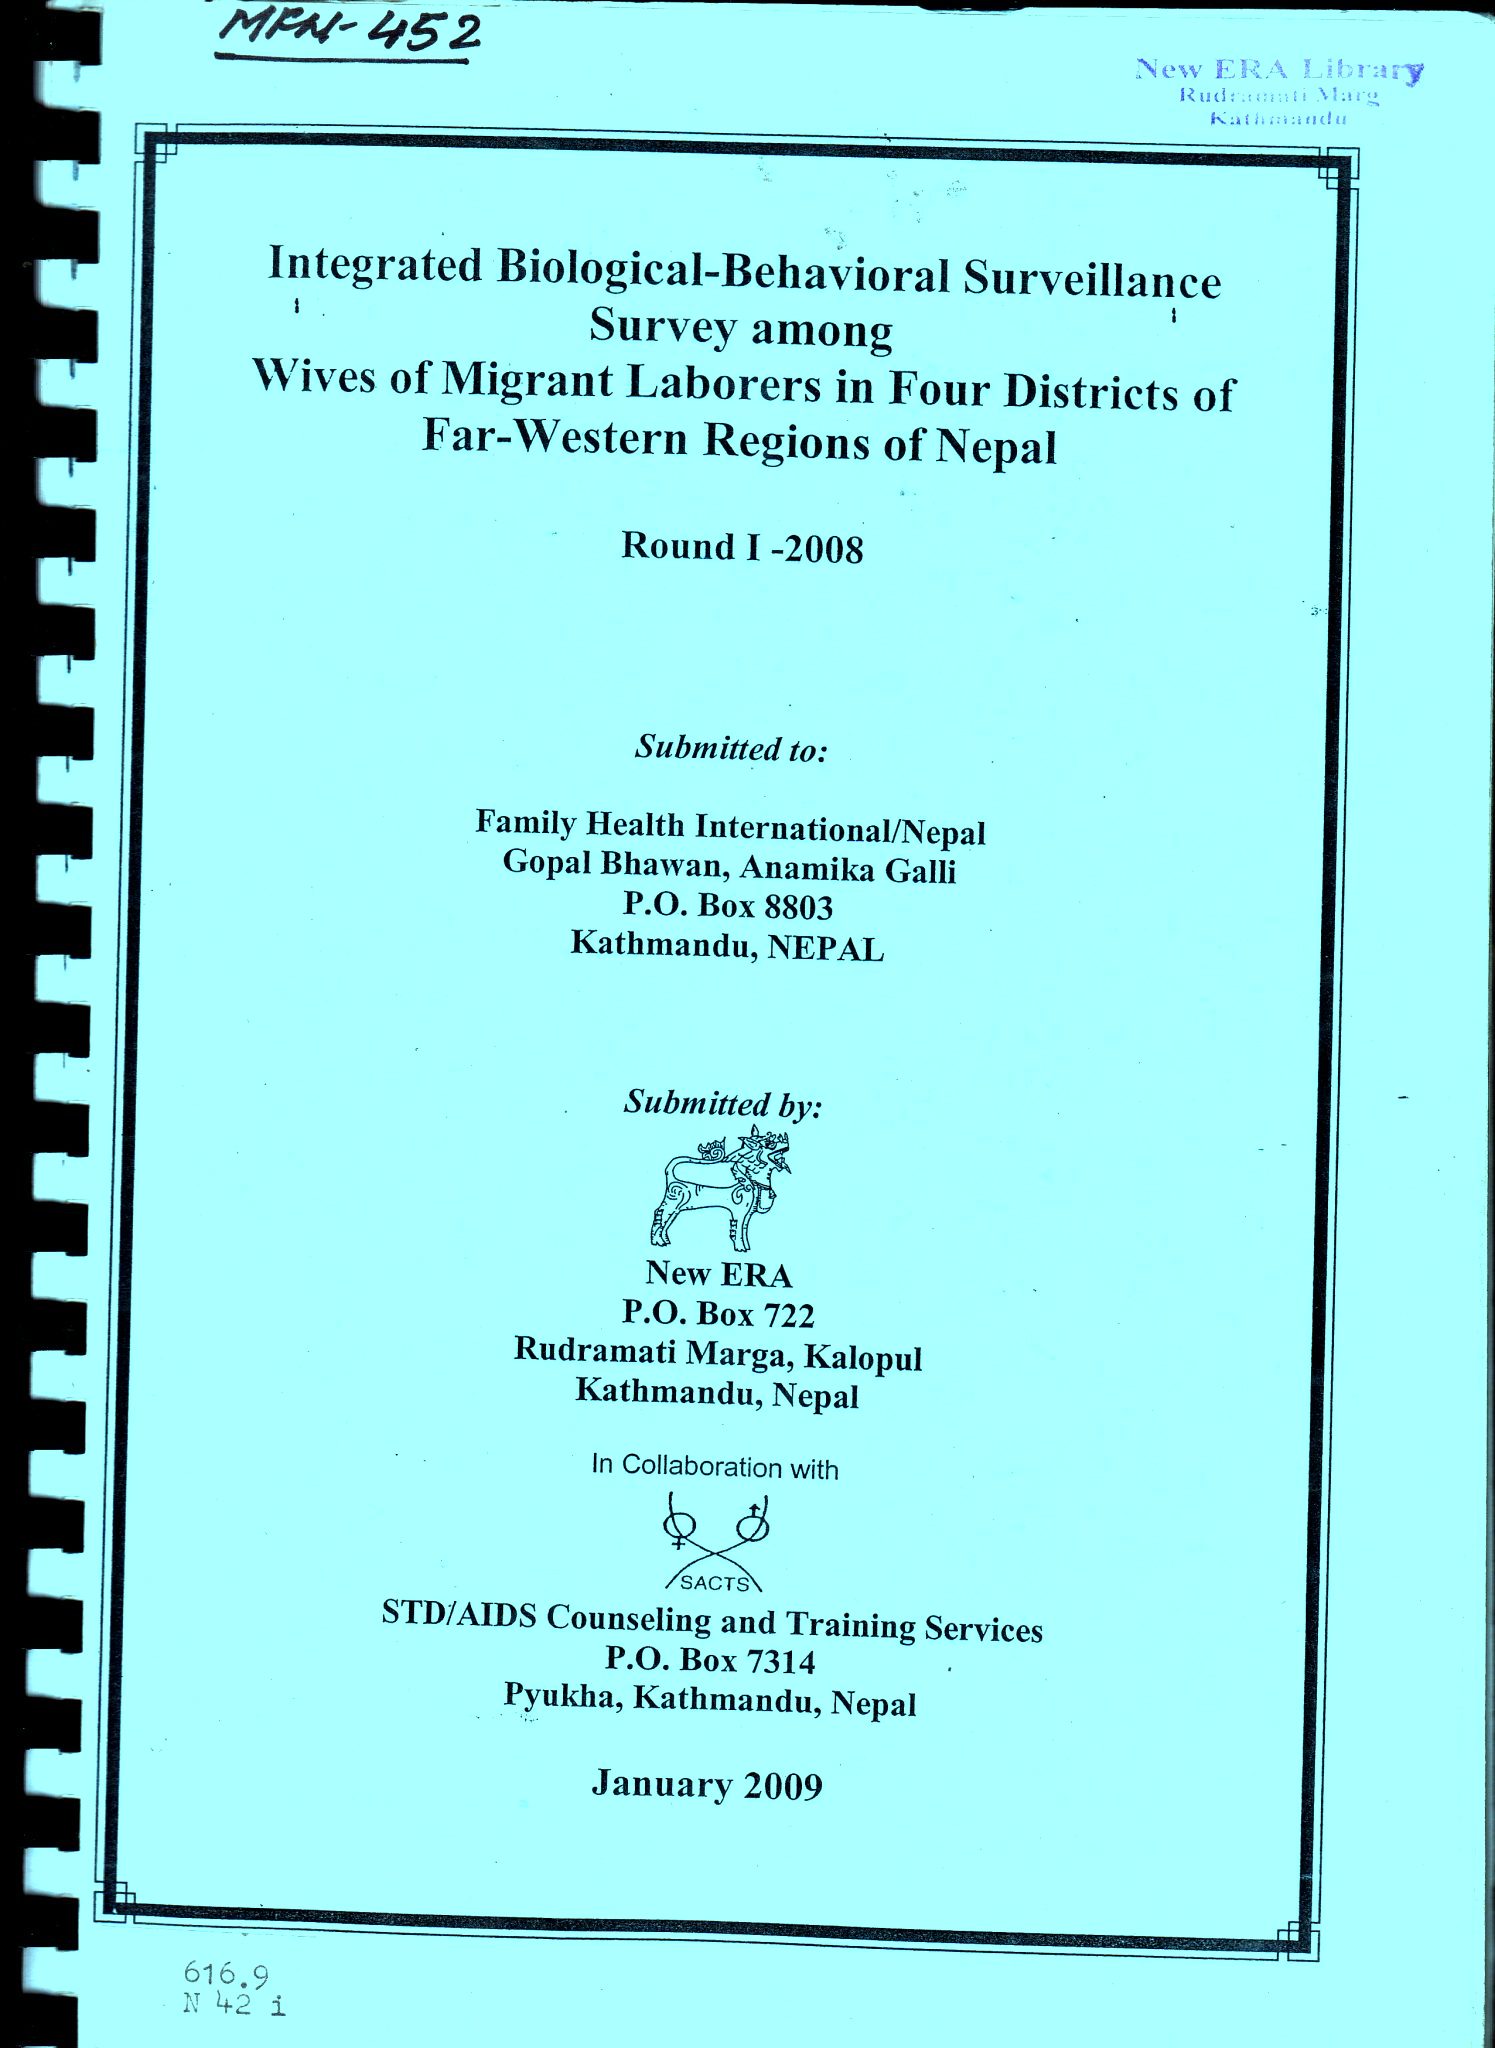 Integrated Bio-Behavioral Survey among Wives of Migrant Laborers in Four Districts of Far Western Regions of Nepal, Round I – 2008